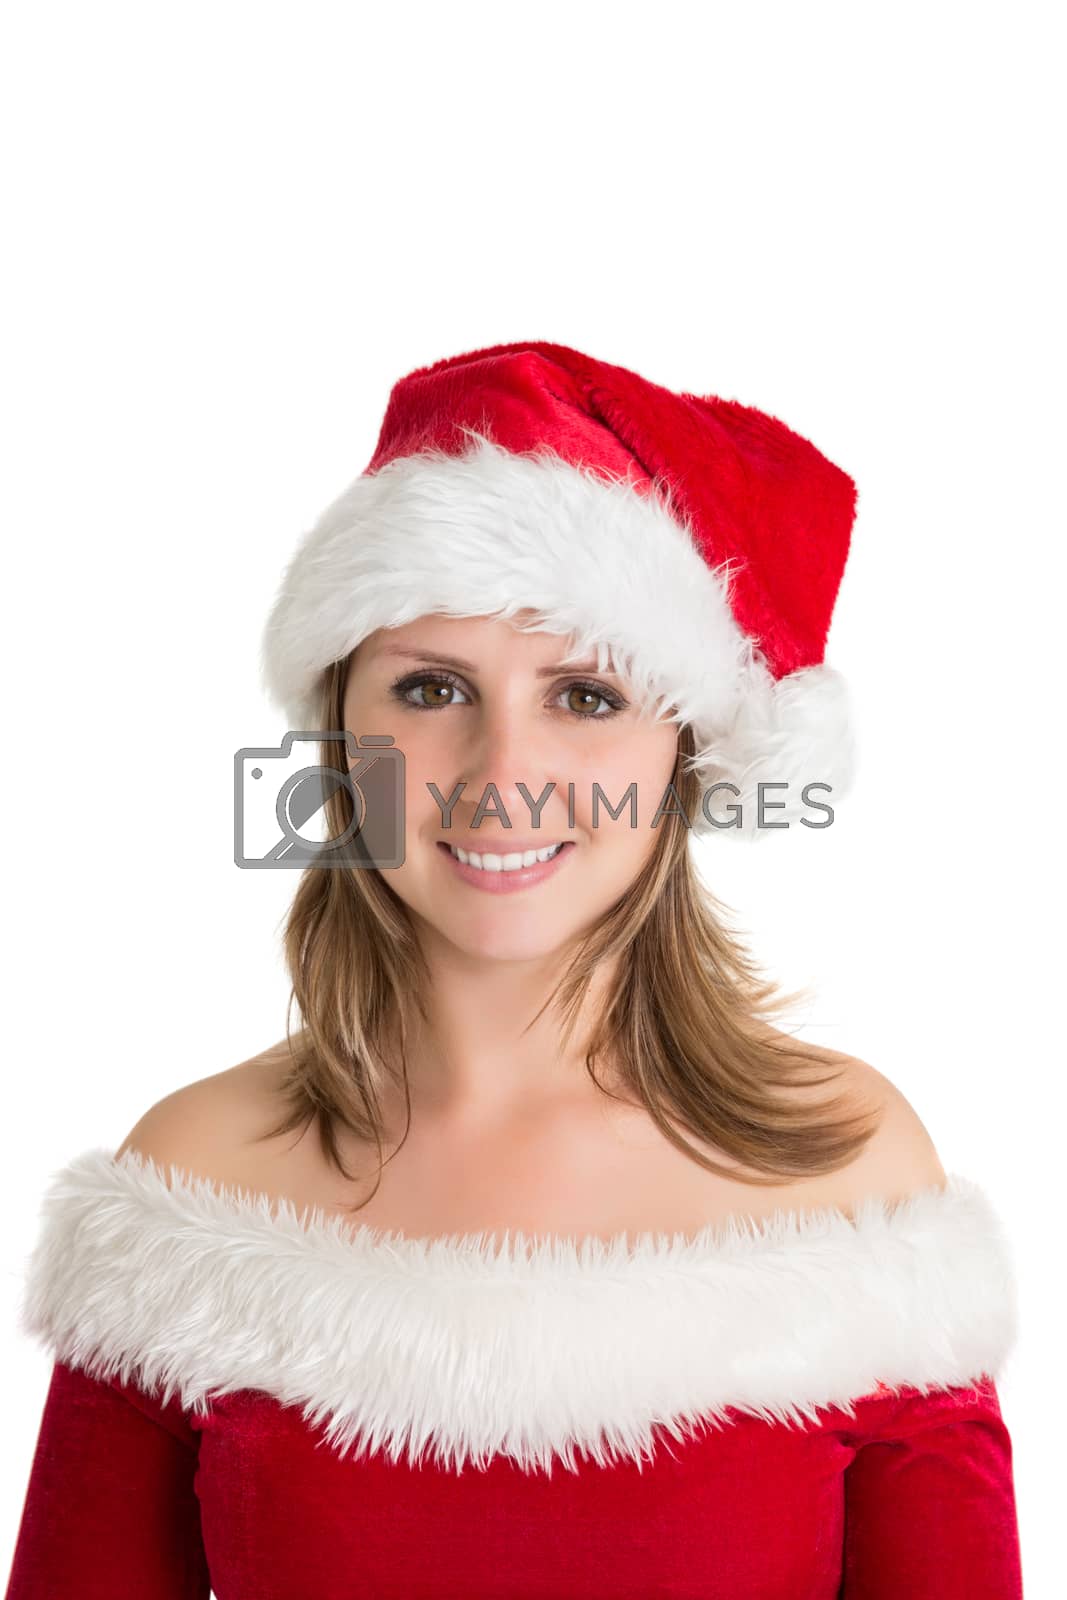 Royalty free image of Portrait of pretty young woman in santa costume smiling by Wavebreakmedia